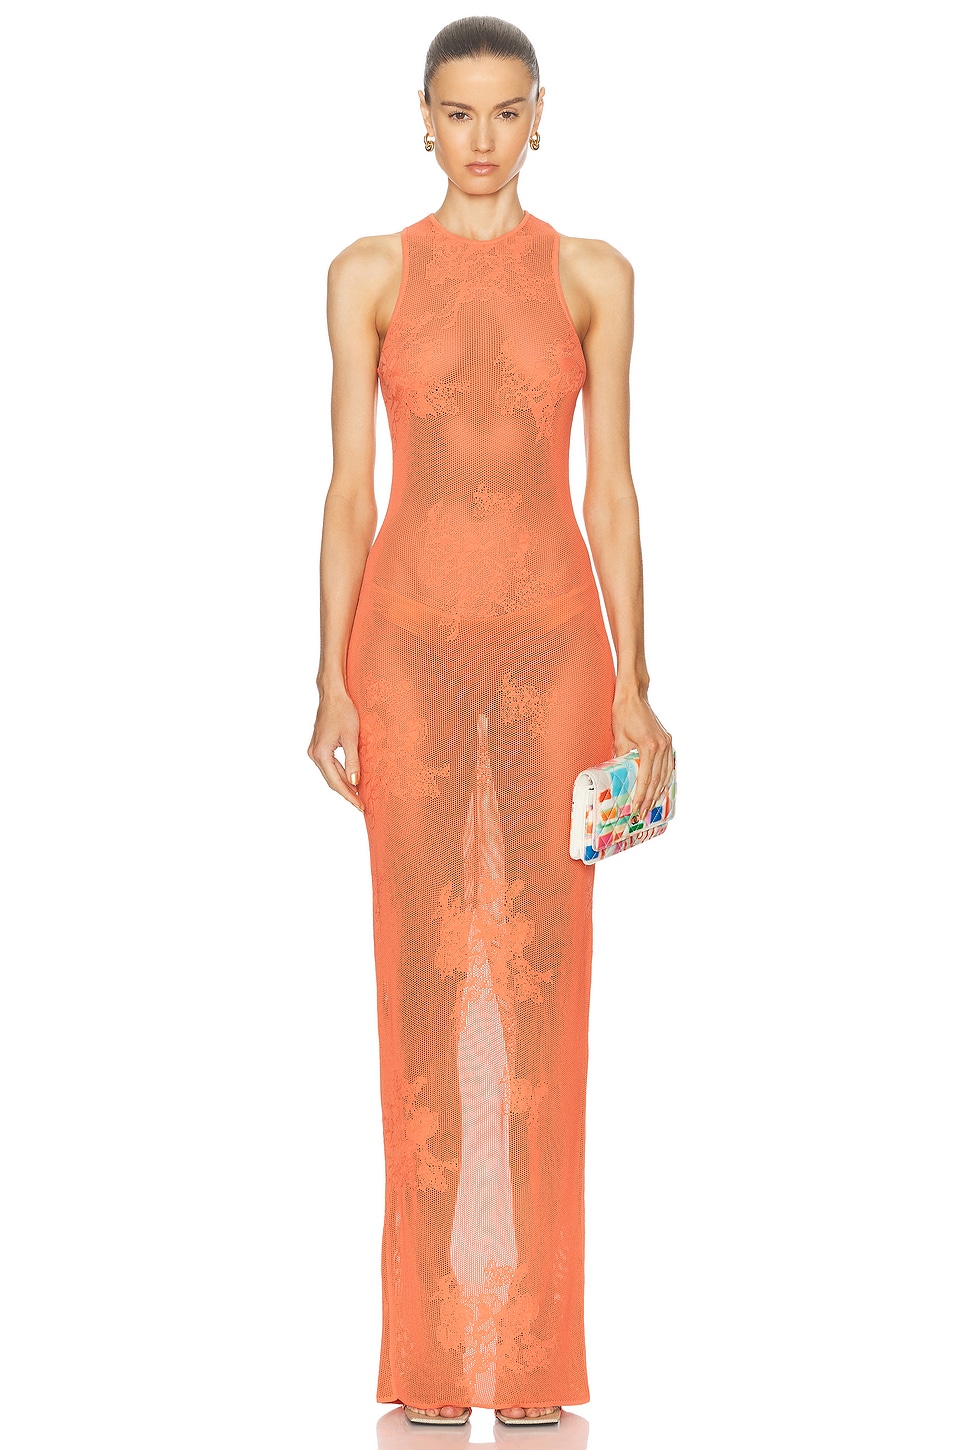 Lace Pointelle Maxi Racer Dress in Tangerine